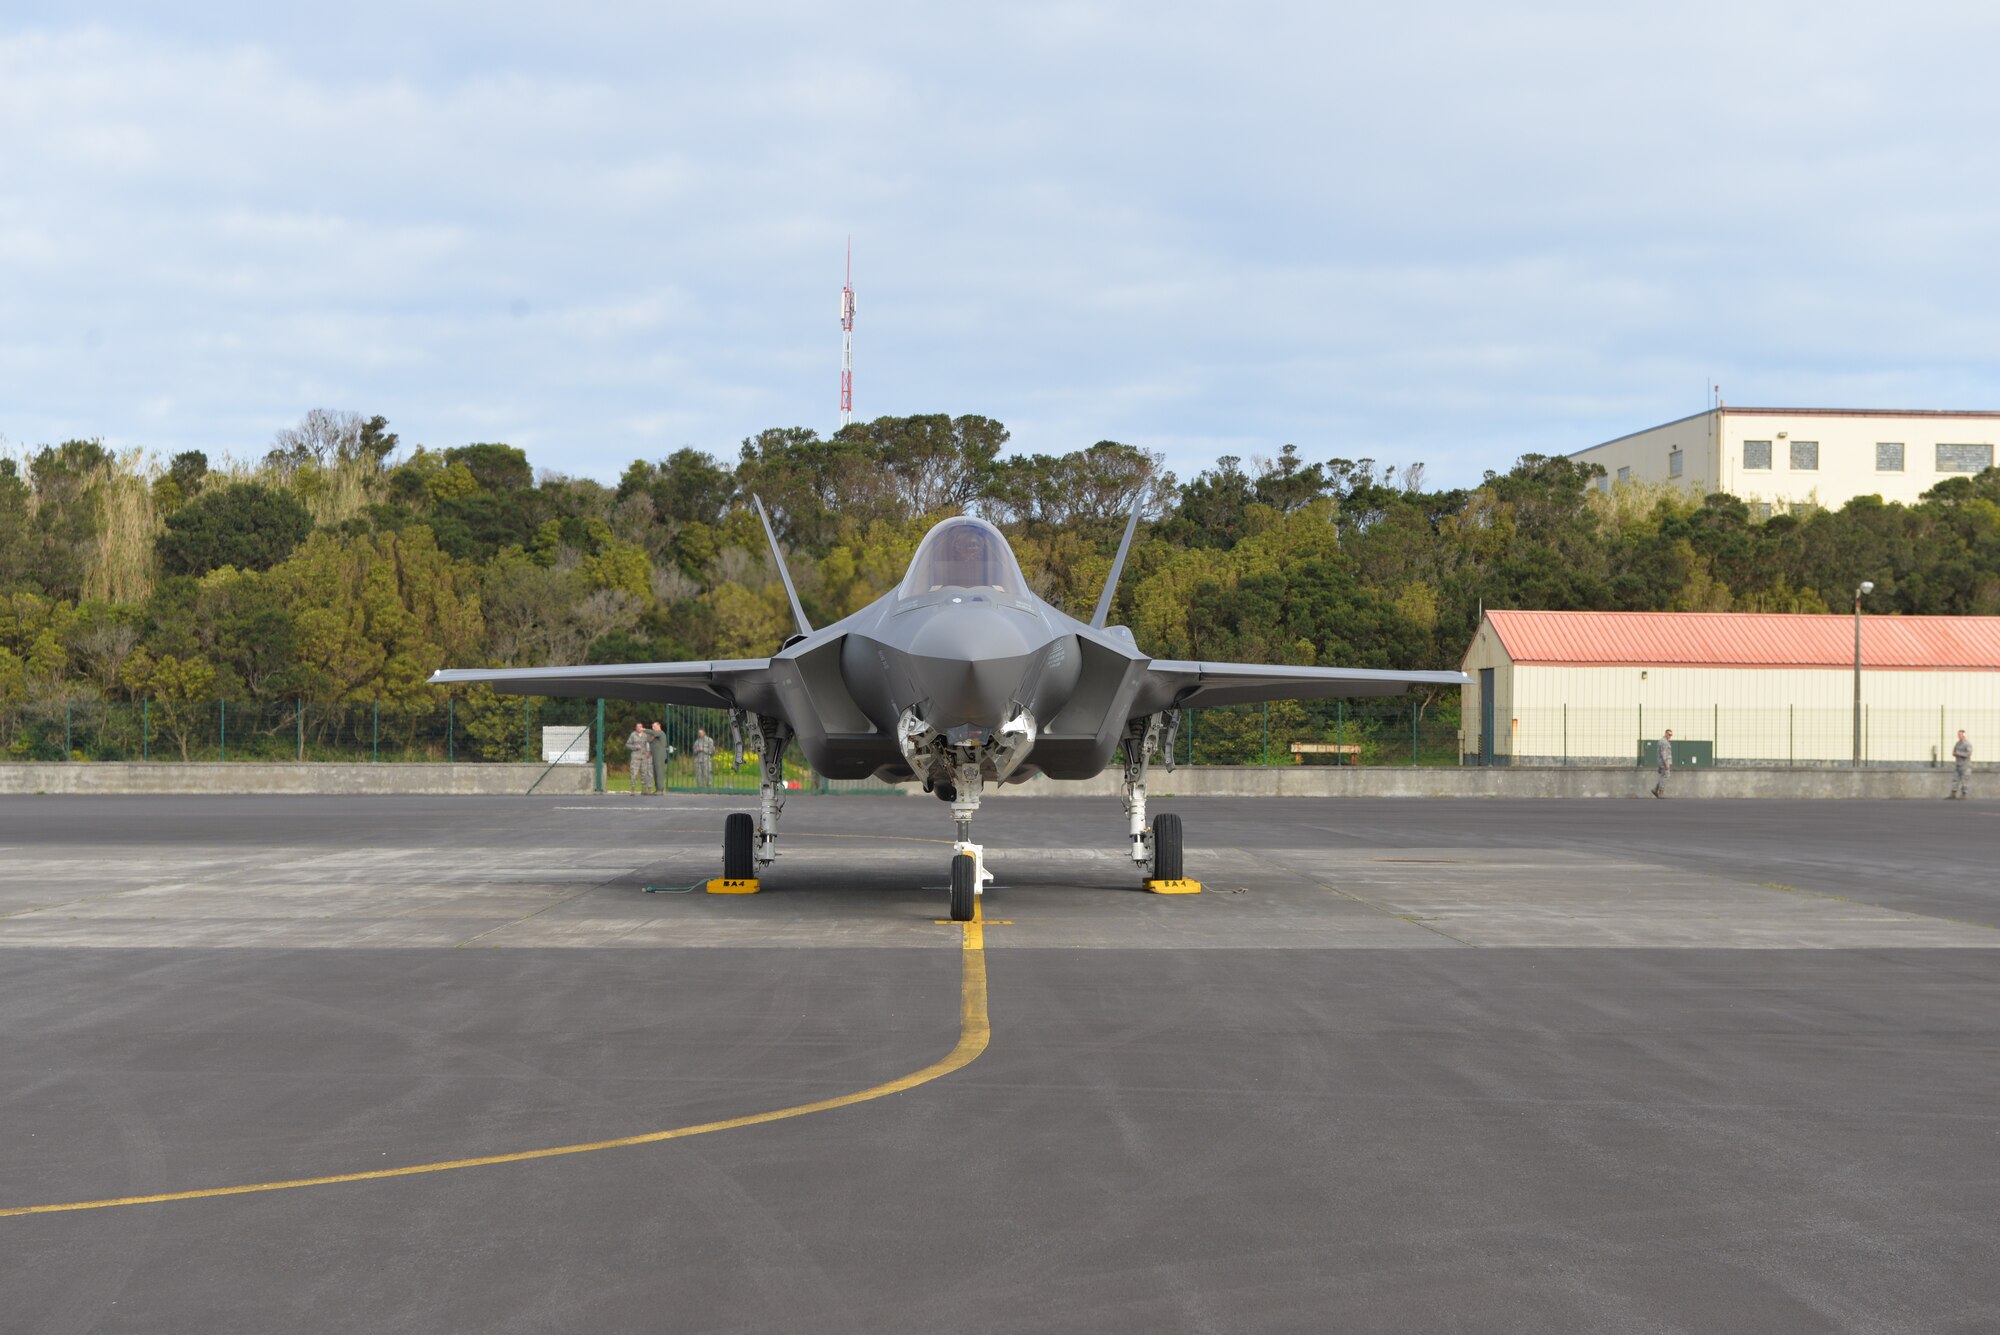 Air Force F-35A Lightning II lands at Lajes Field, Azores Portugal February 3, 2016. The Italian F-35A Lightning II refueled at Lajes Field on the first trans-Atlantic Ocean crossing from Cameri, Air Base Italy to Naval Air Station Patuxent River, Md., Feb 3-5. (U.S. Air Force photo by 1st Lt. Alexandra Trobe/Released)  
 
